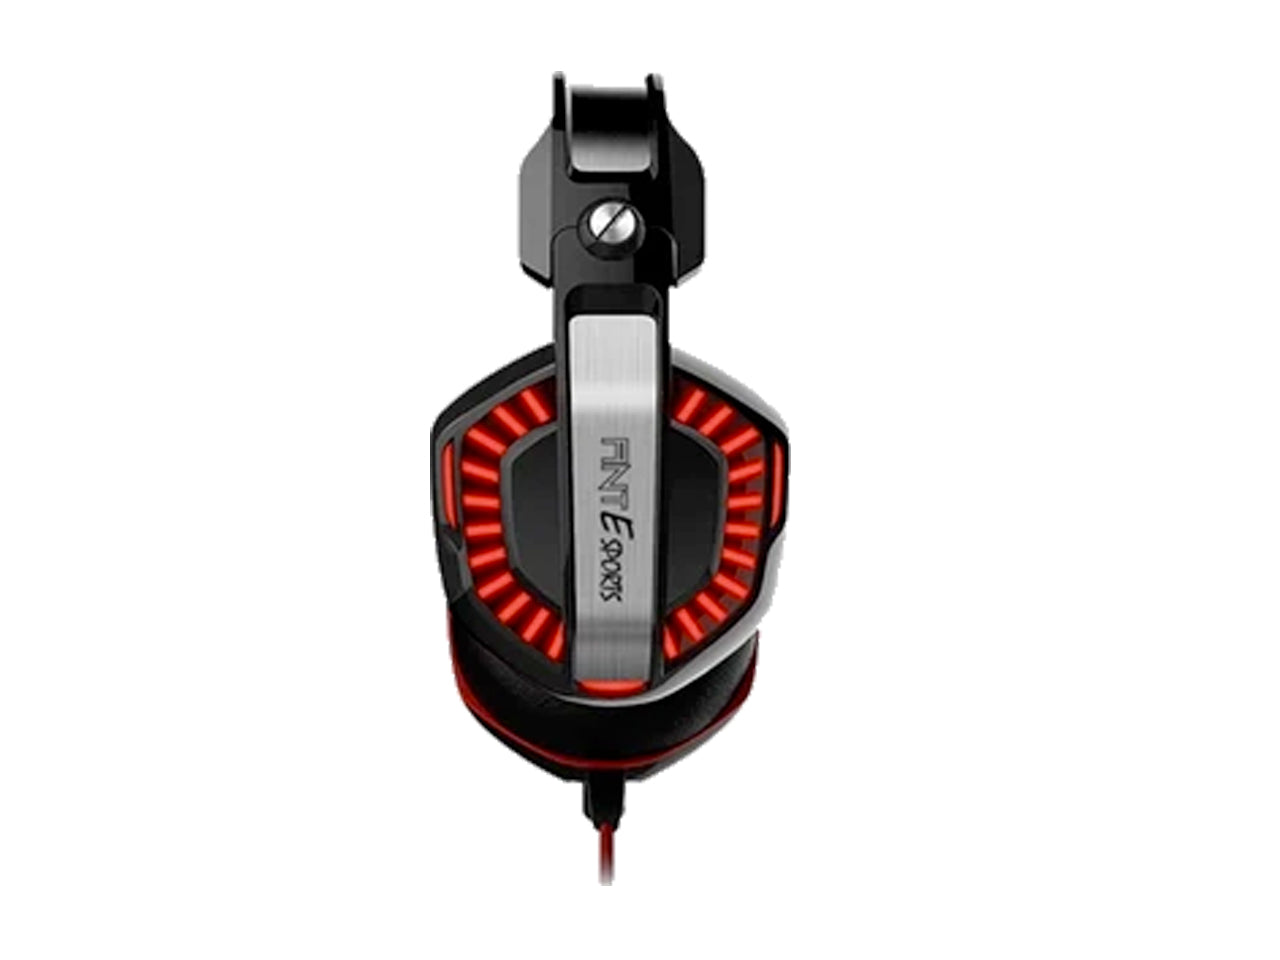 Ant Esports H900 Surround Stereo Gaming Over Ear Headphones with Mic